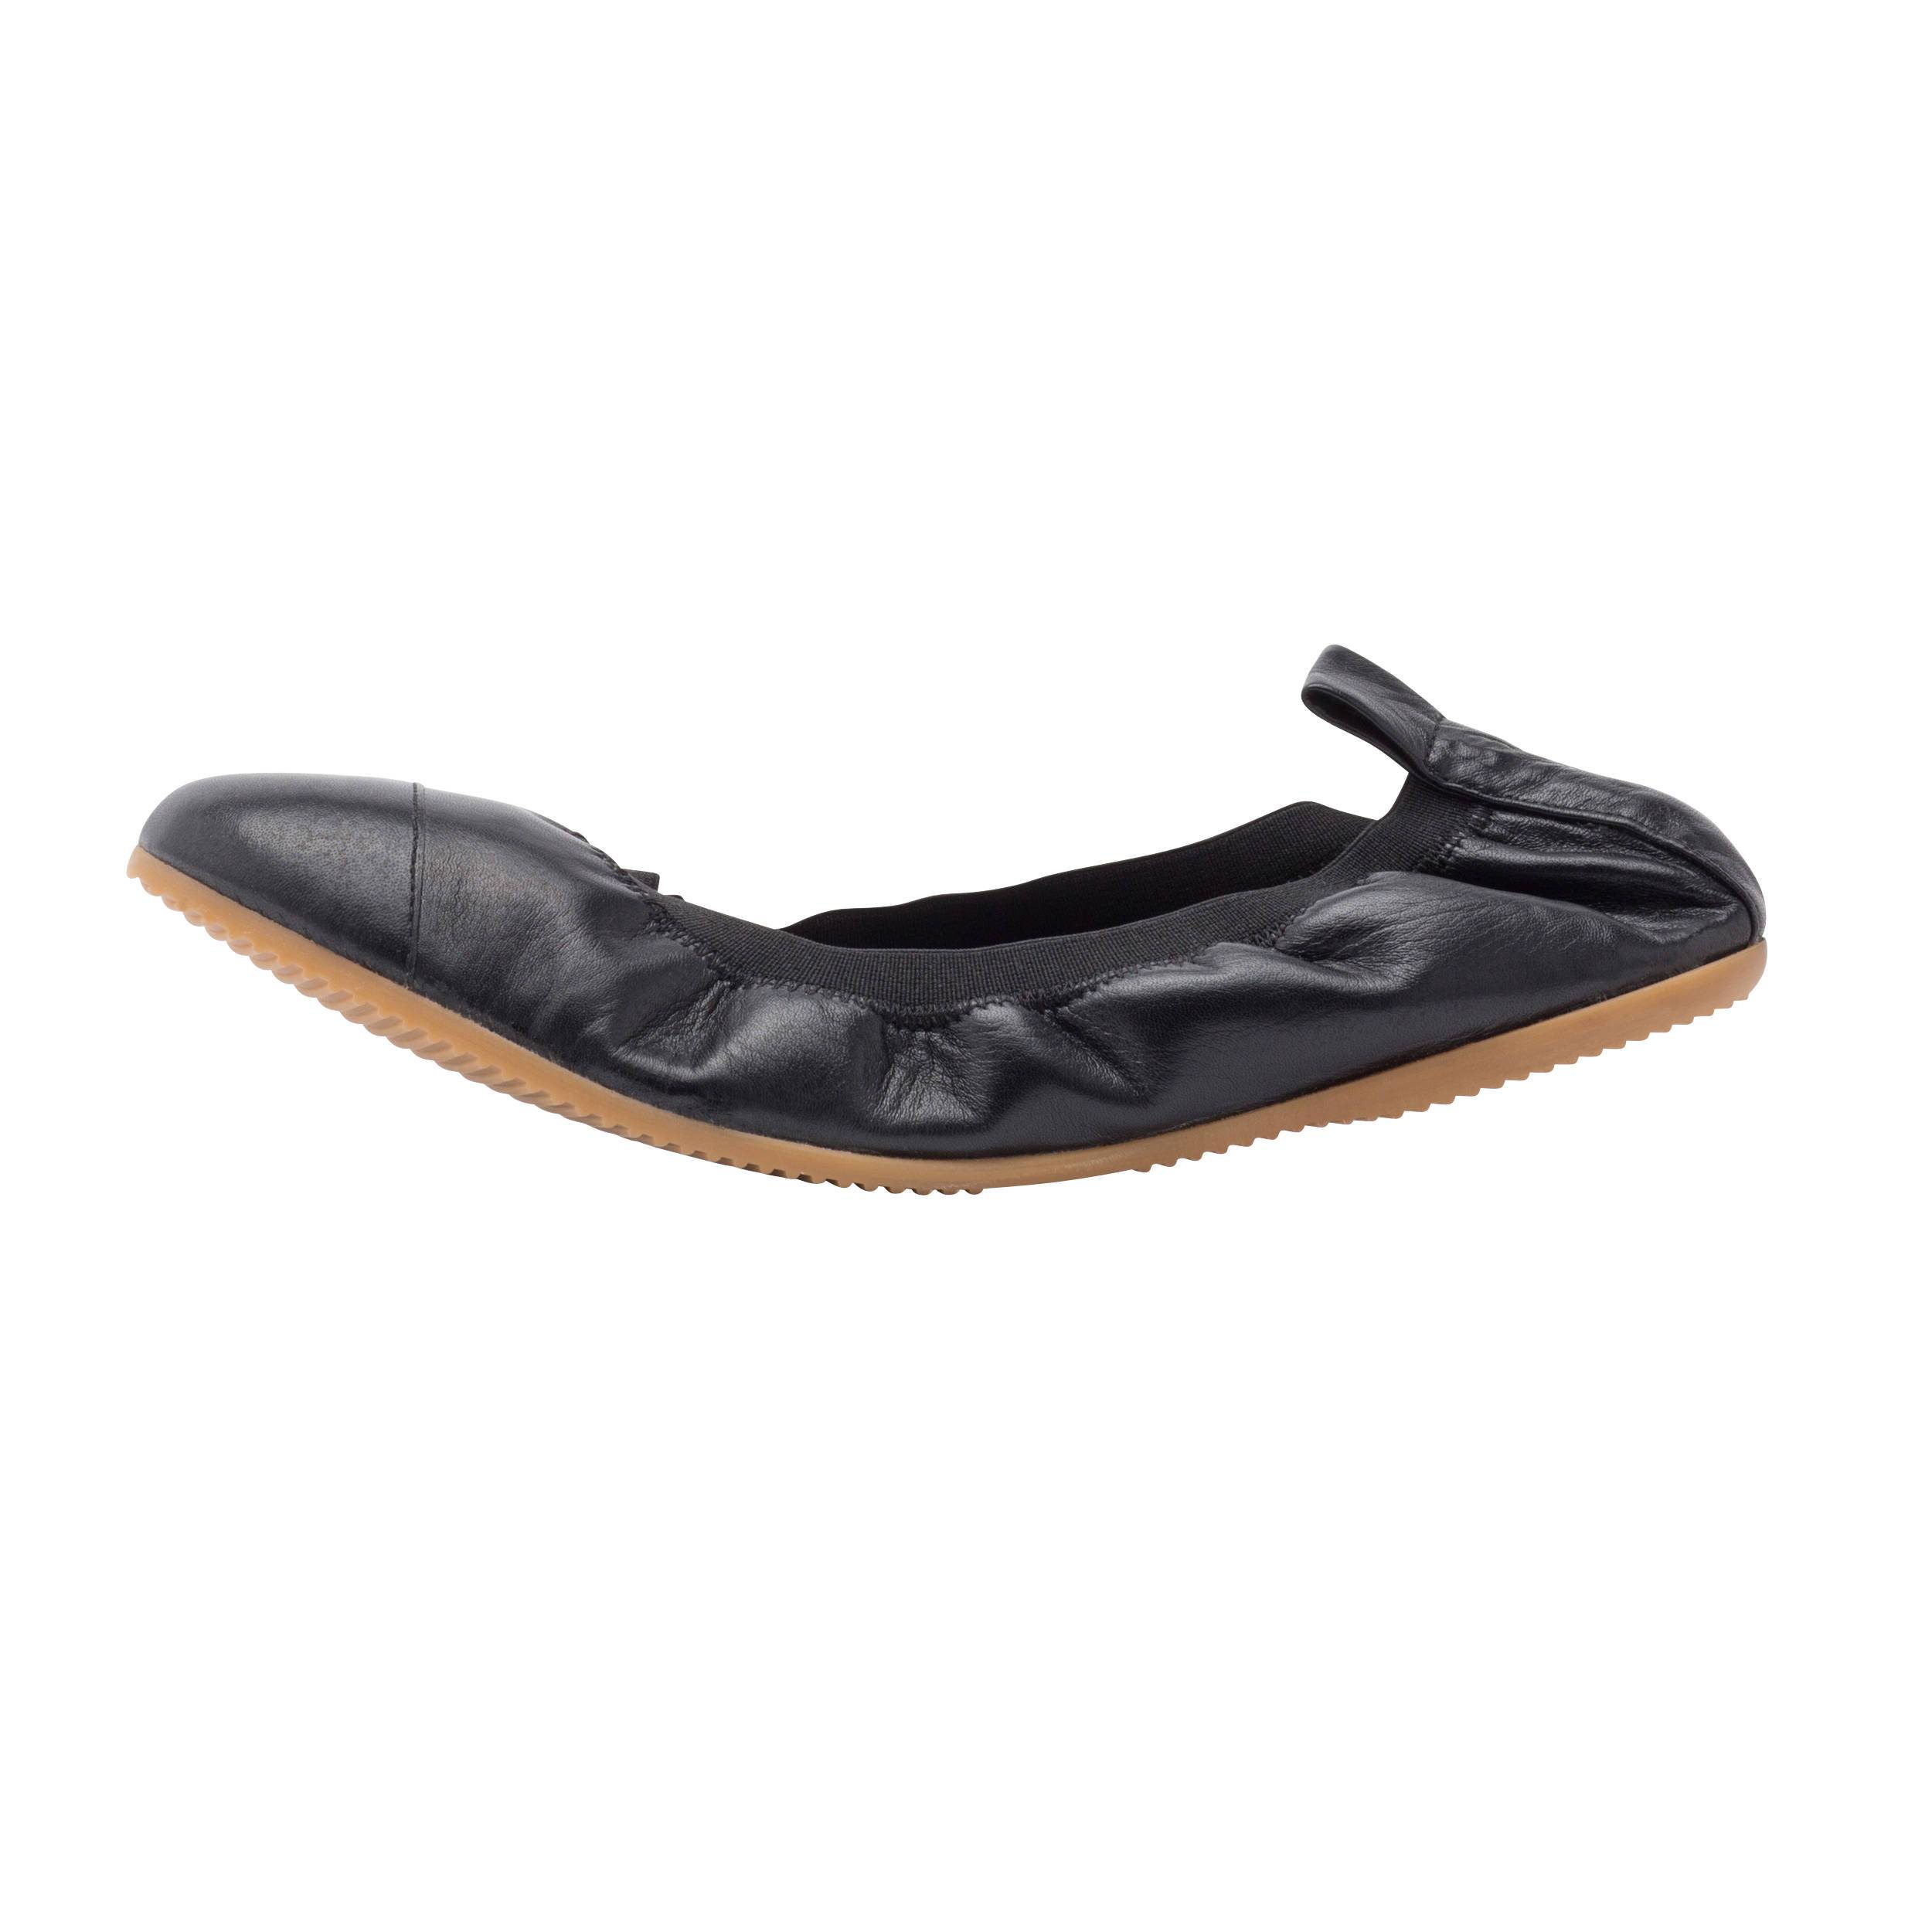 Ballet Flats - Black Leather - Cammino Shoes